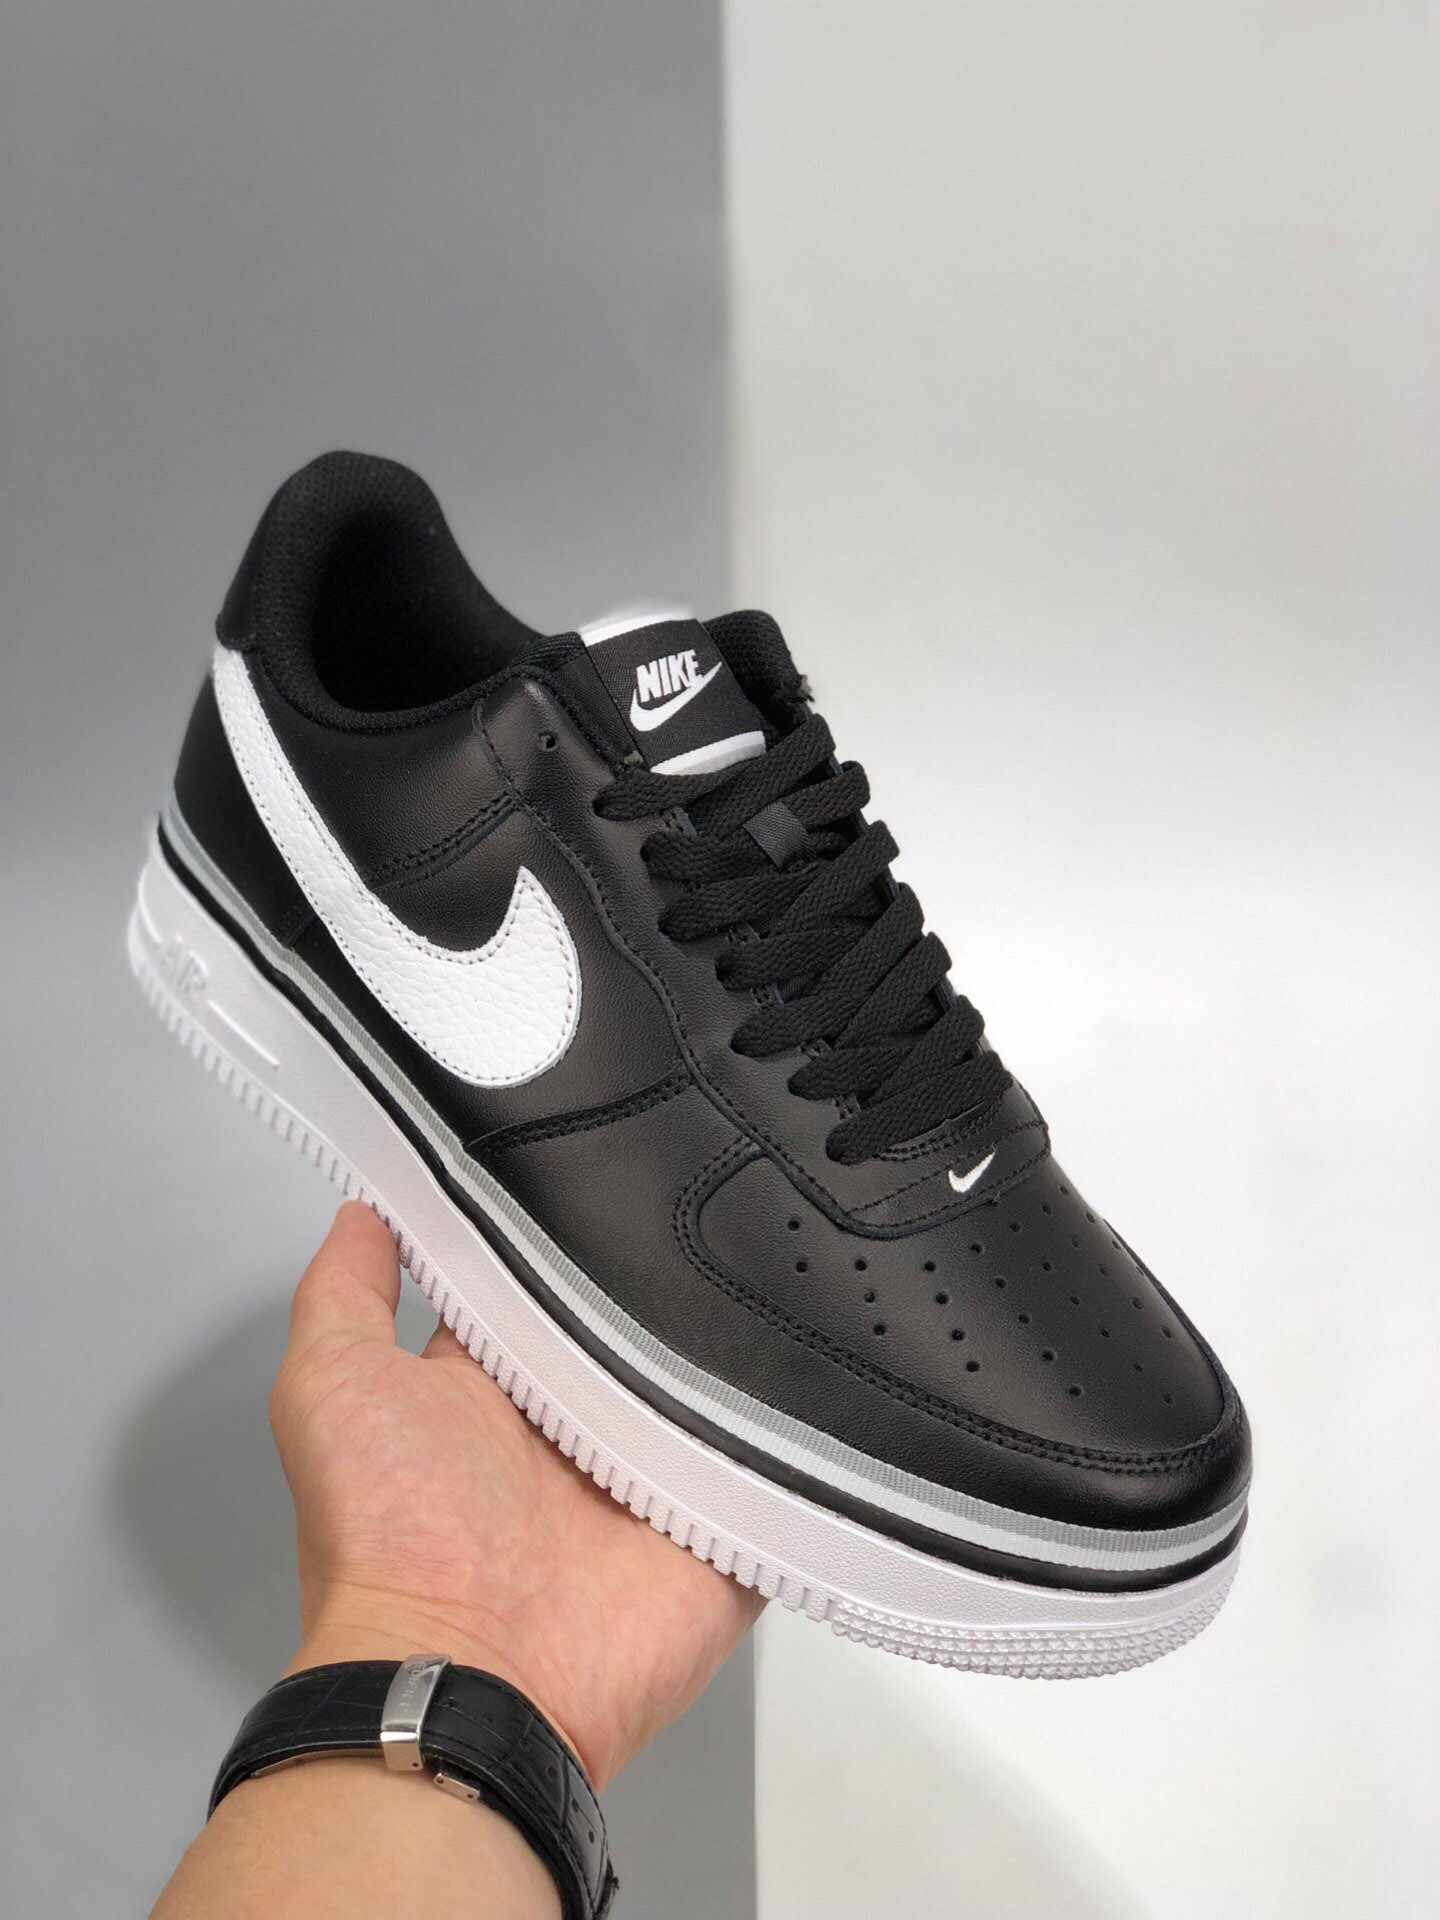 Nike Air Force 1 Low ‘Ribbon’ Black White CT1621-001 For Sale – Sneaker ...